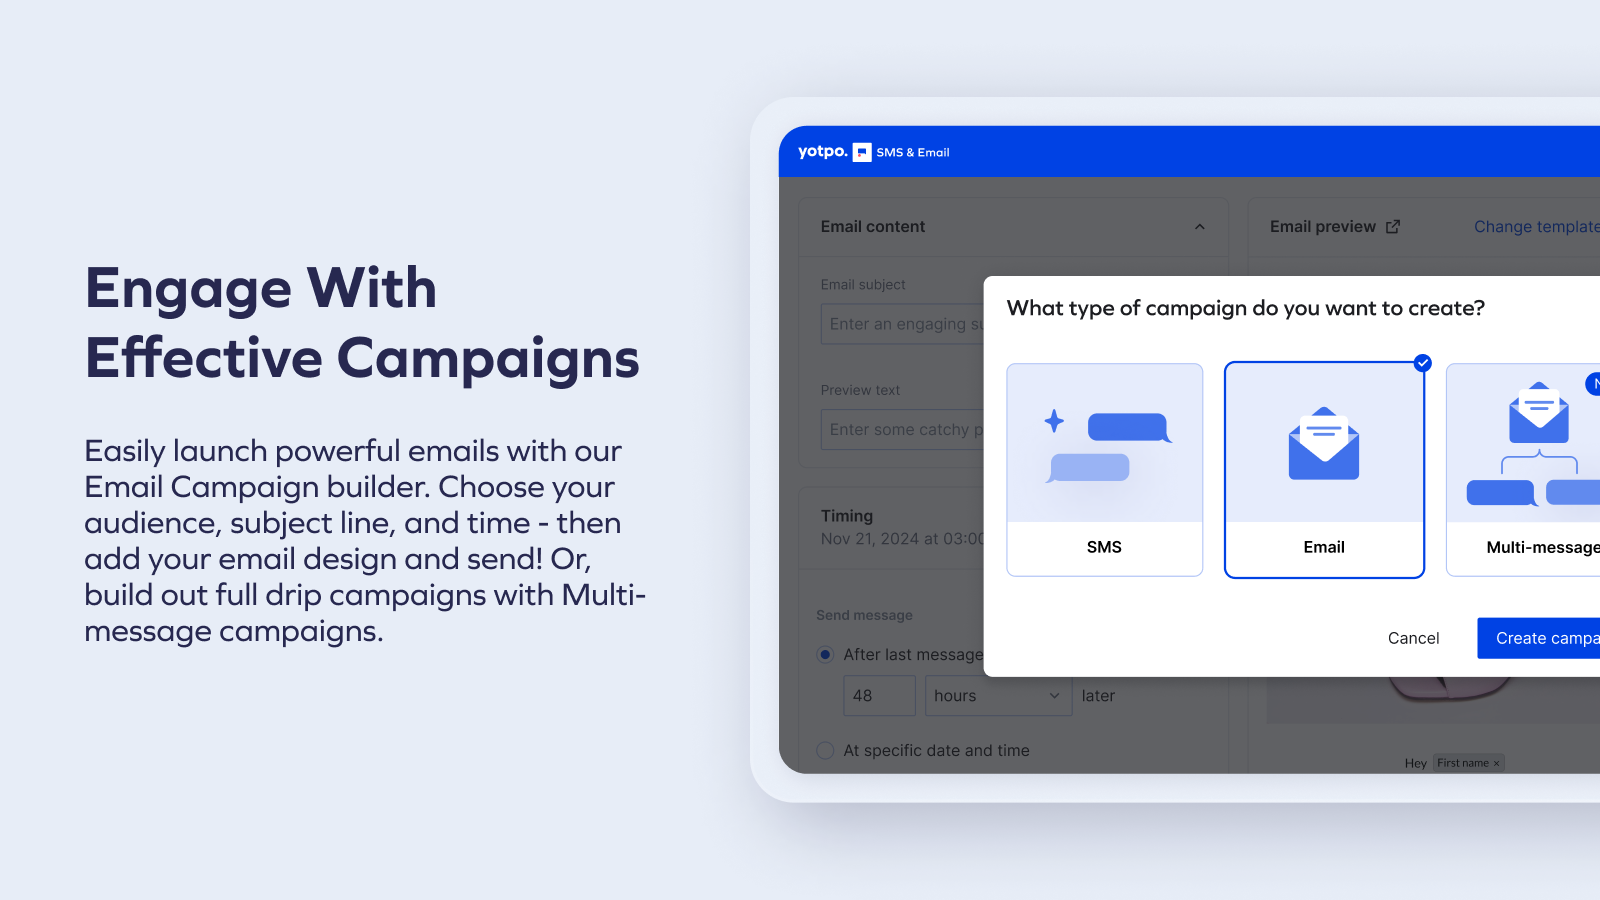 Engage With Effective campaigns - Create email & SMS campaigns